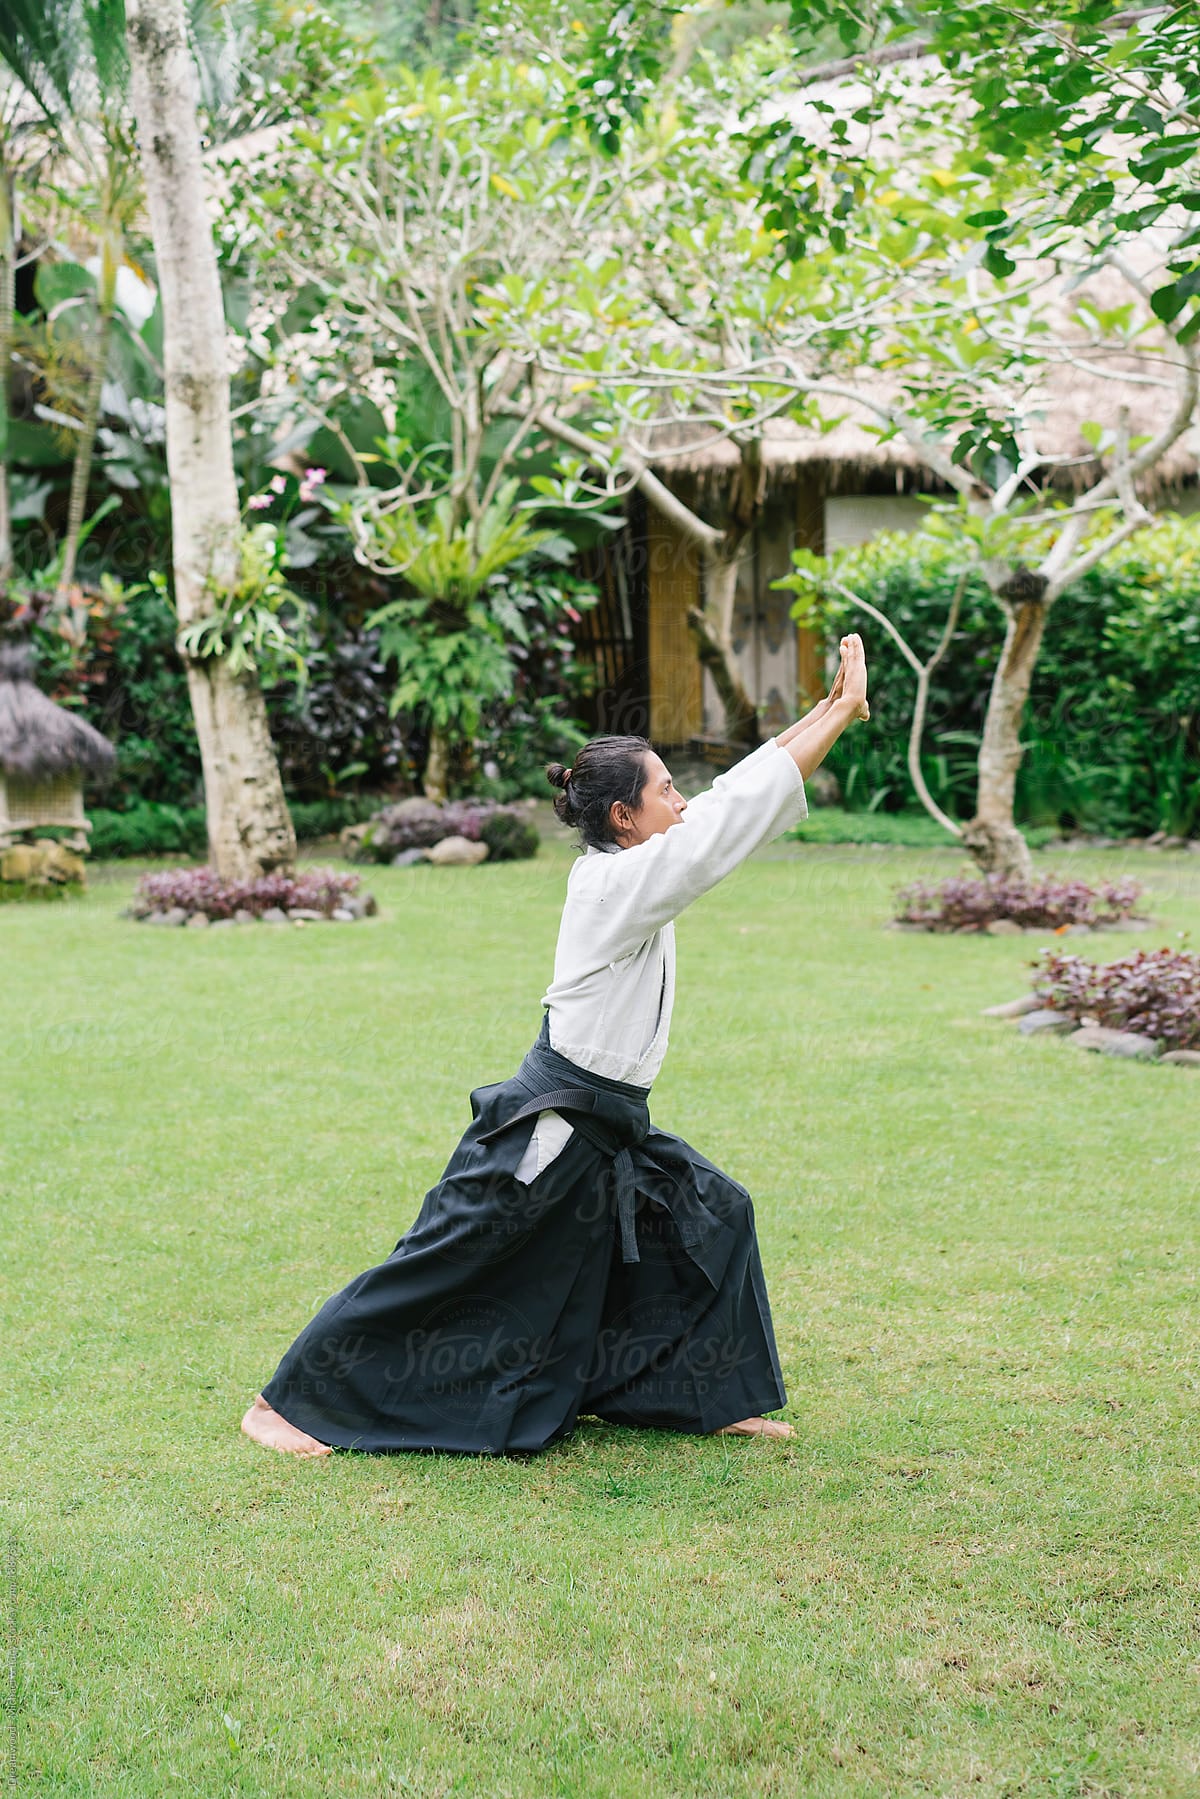 Professional aikido master in pose